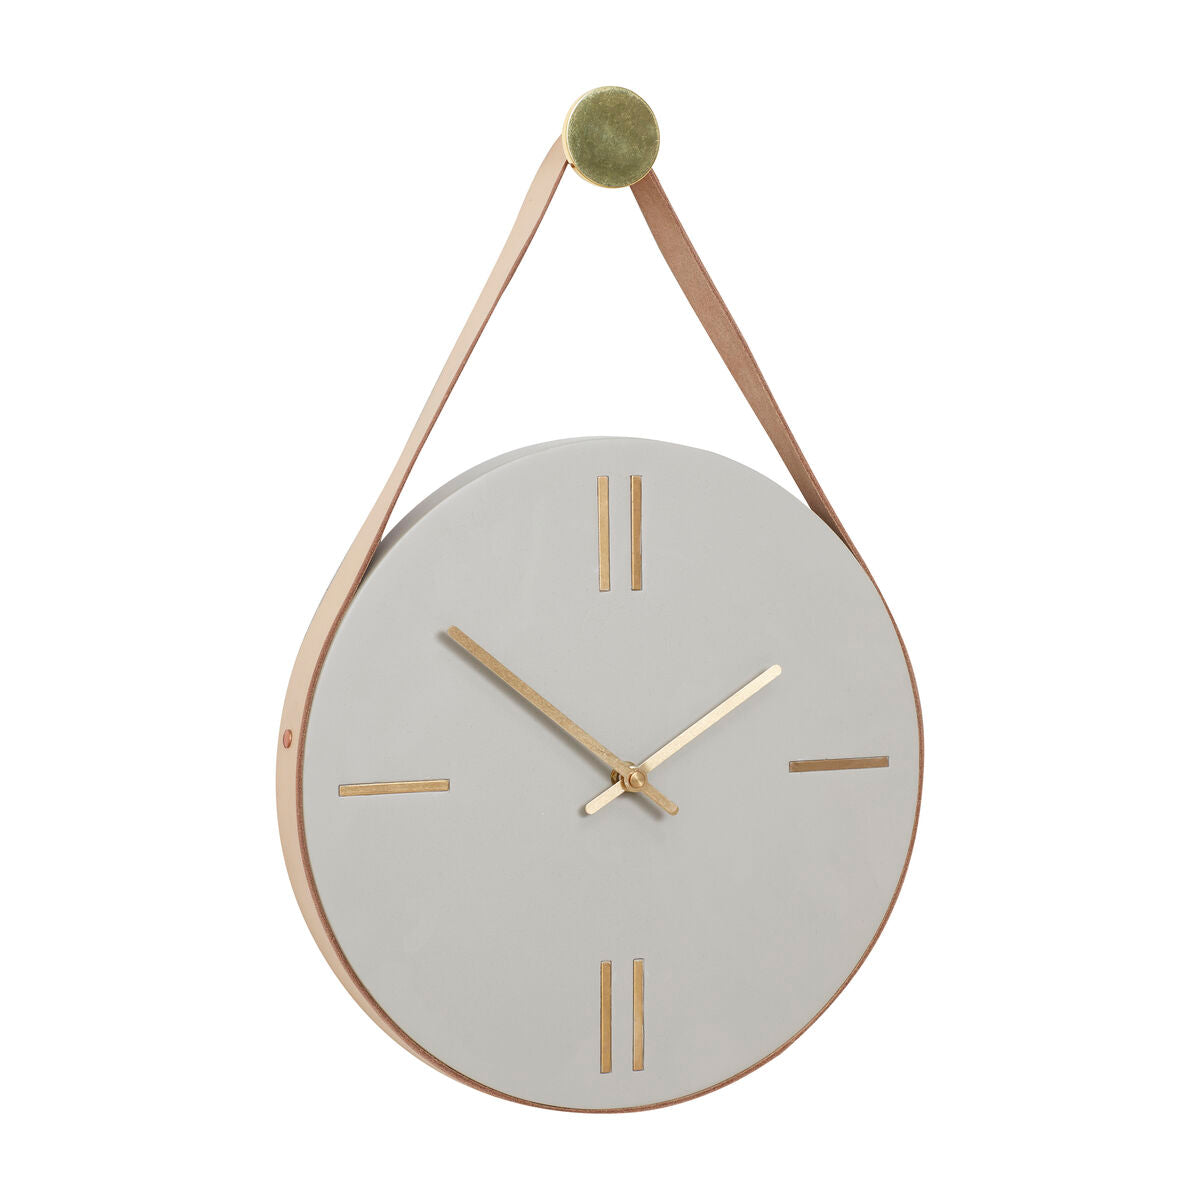 DROP wall clock with leather strap